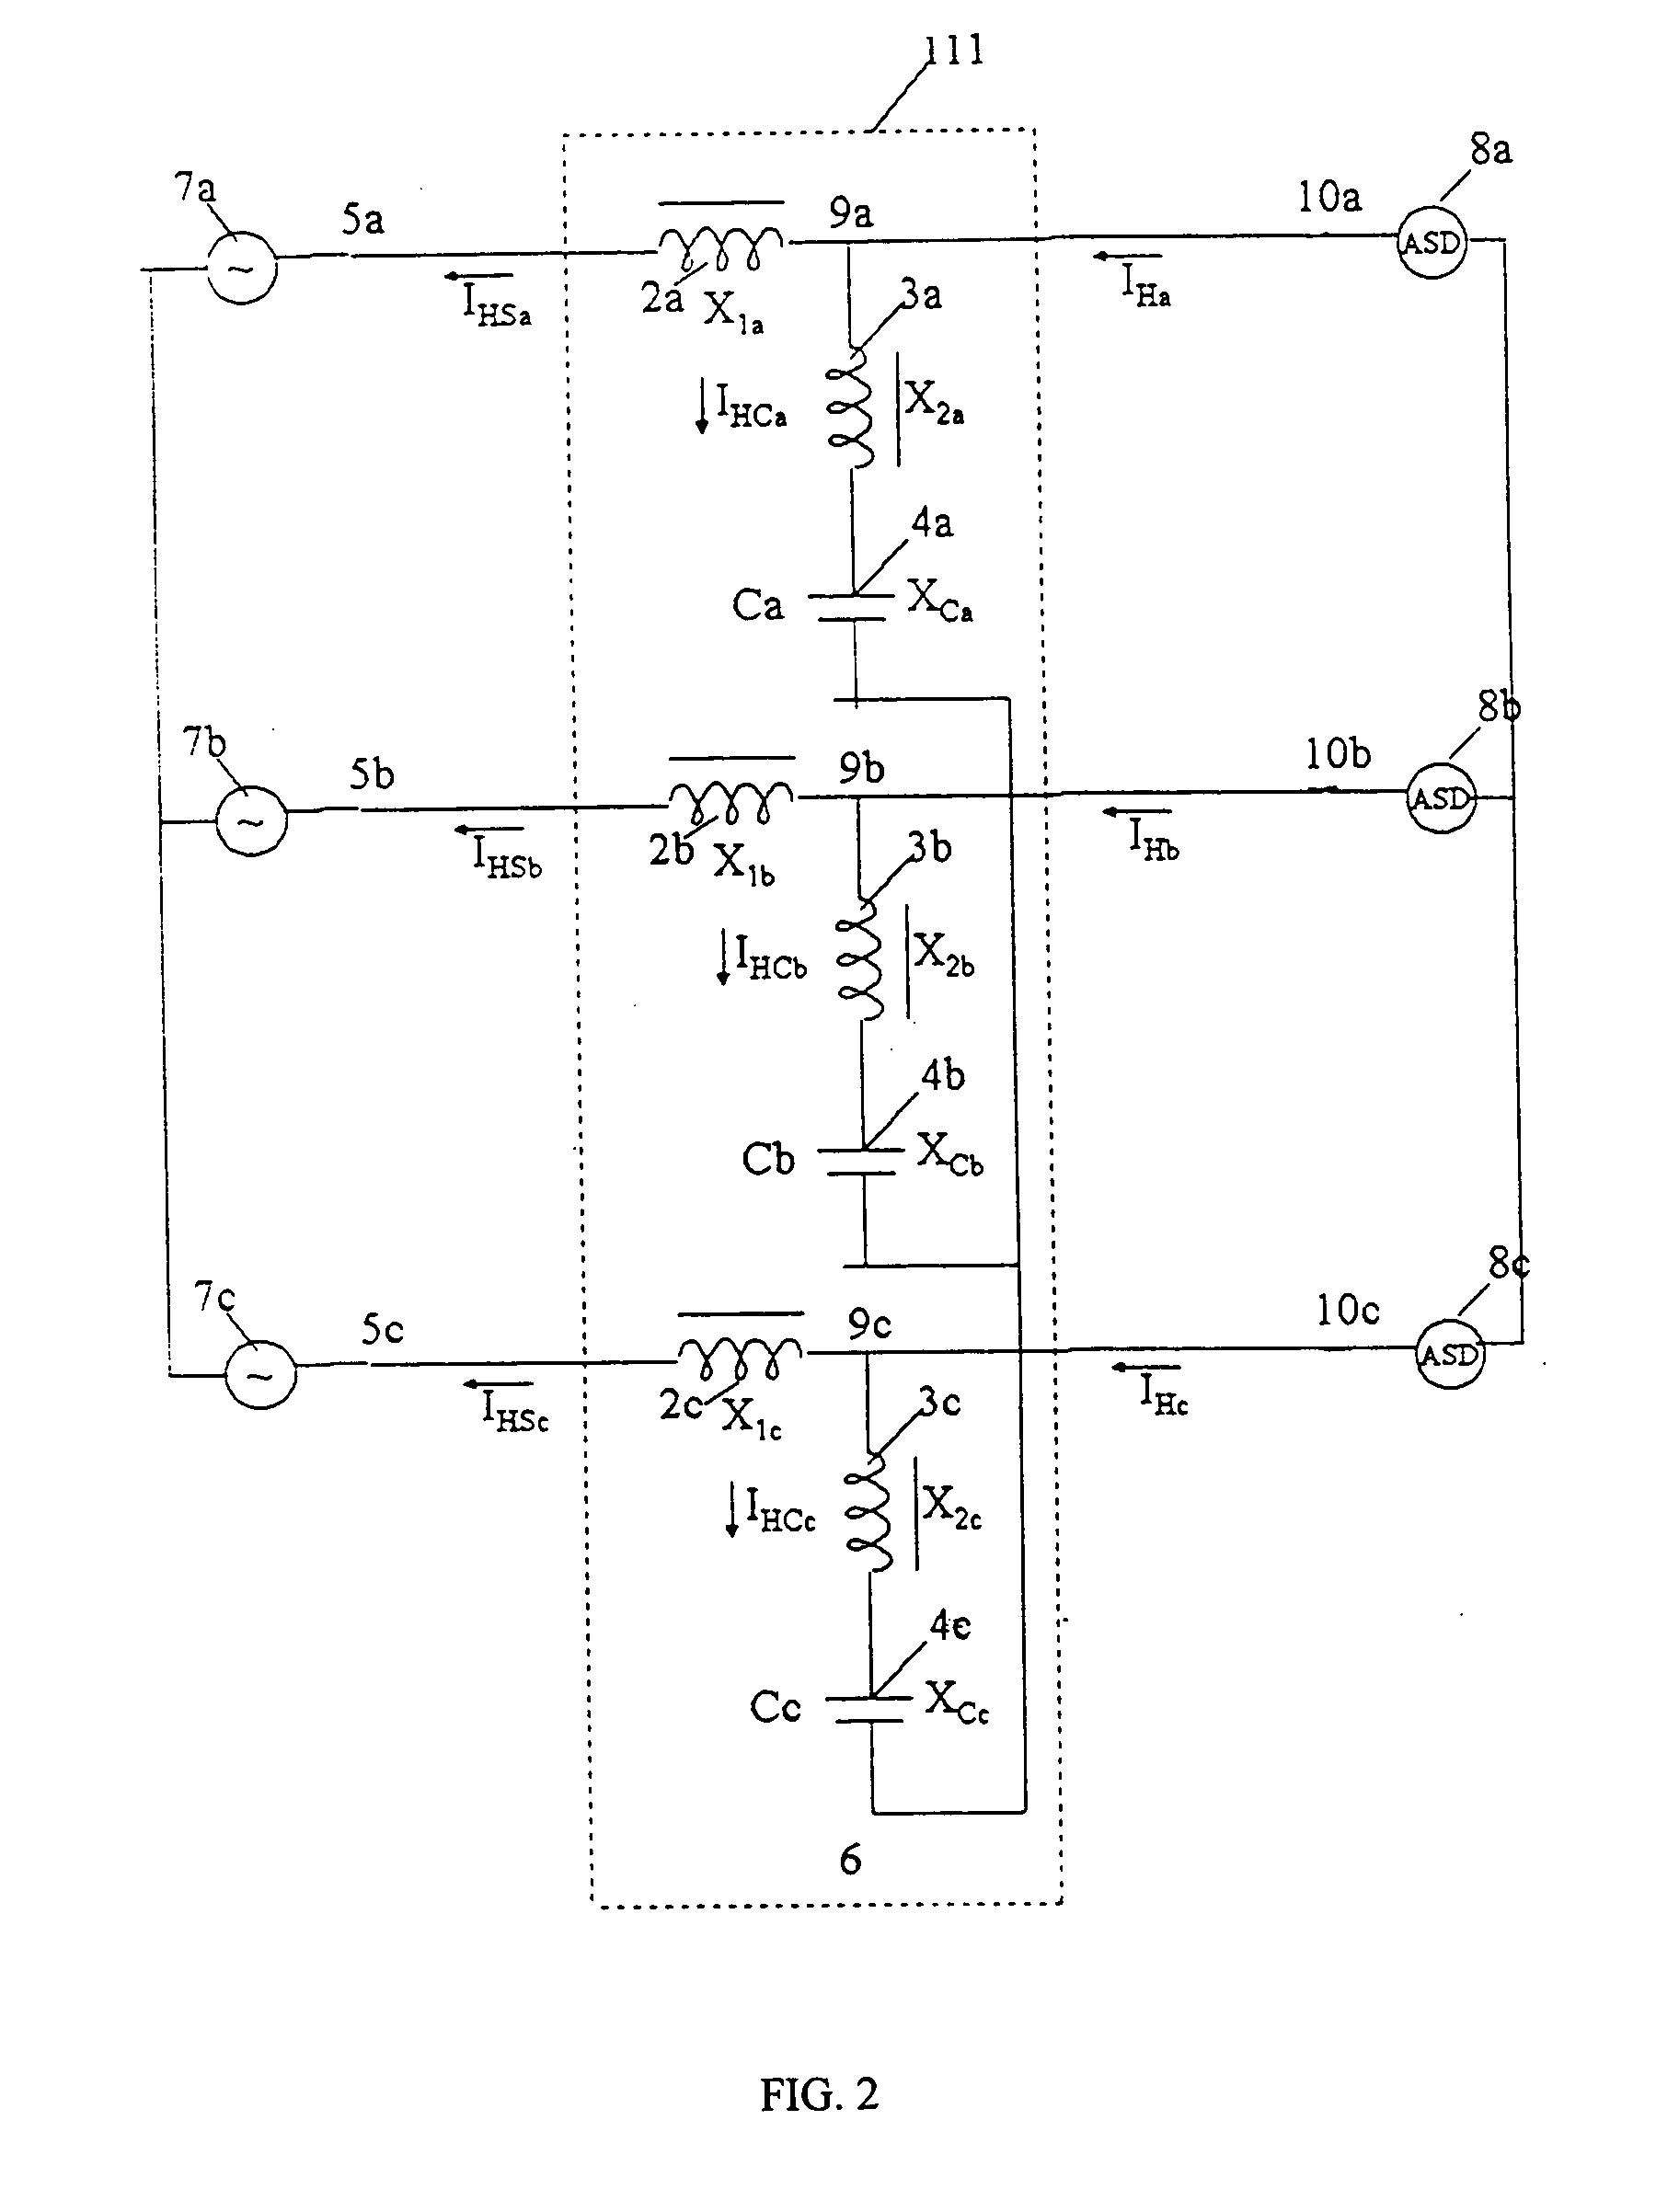 Controllable board-spectrum harmonic filter (CBF) for electrical power systems